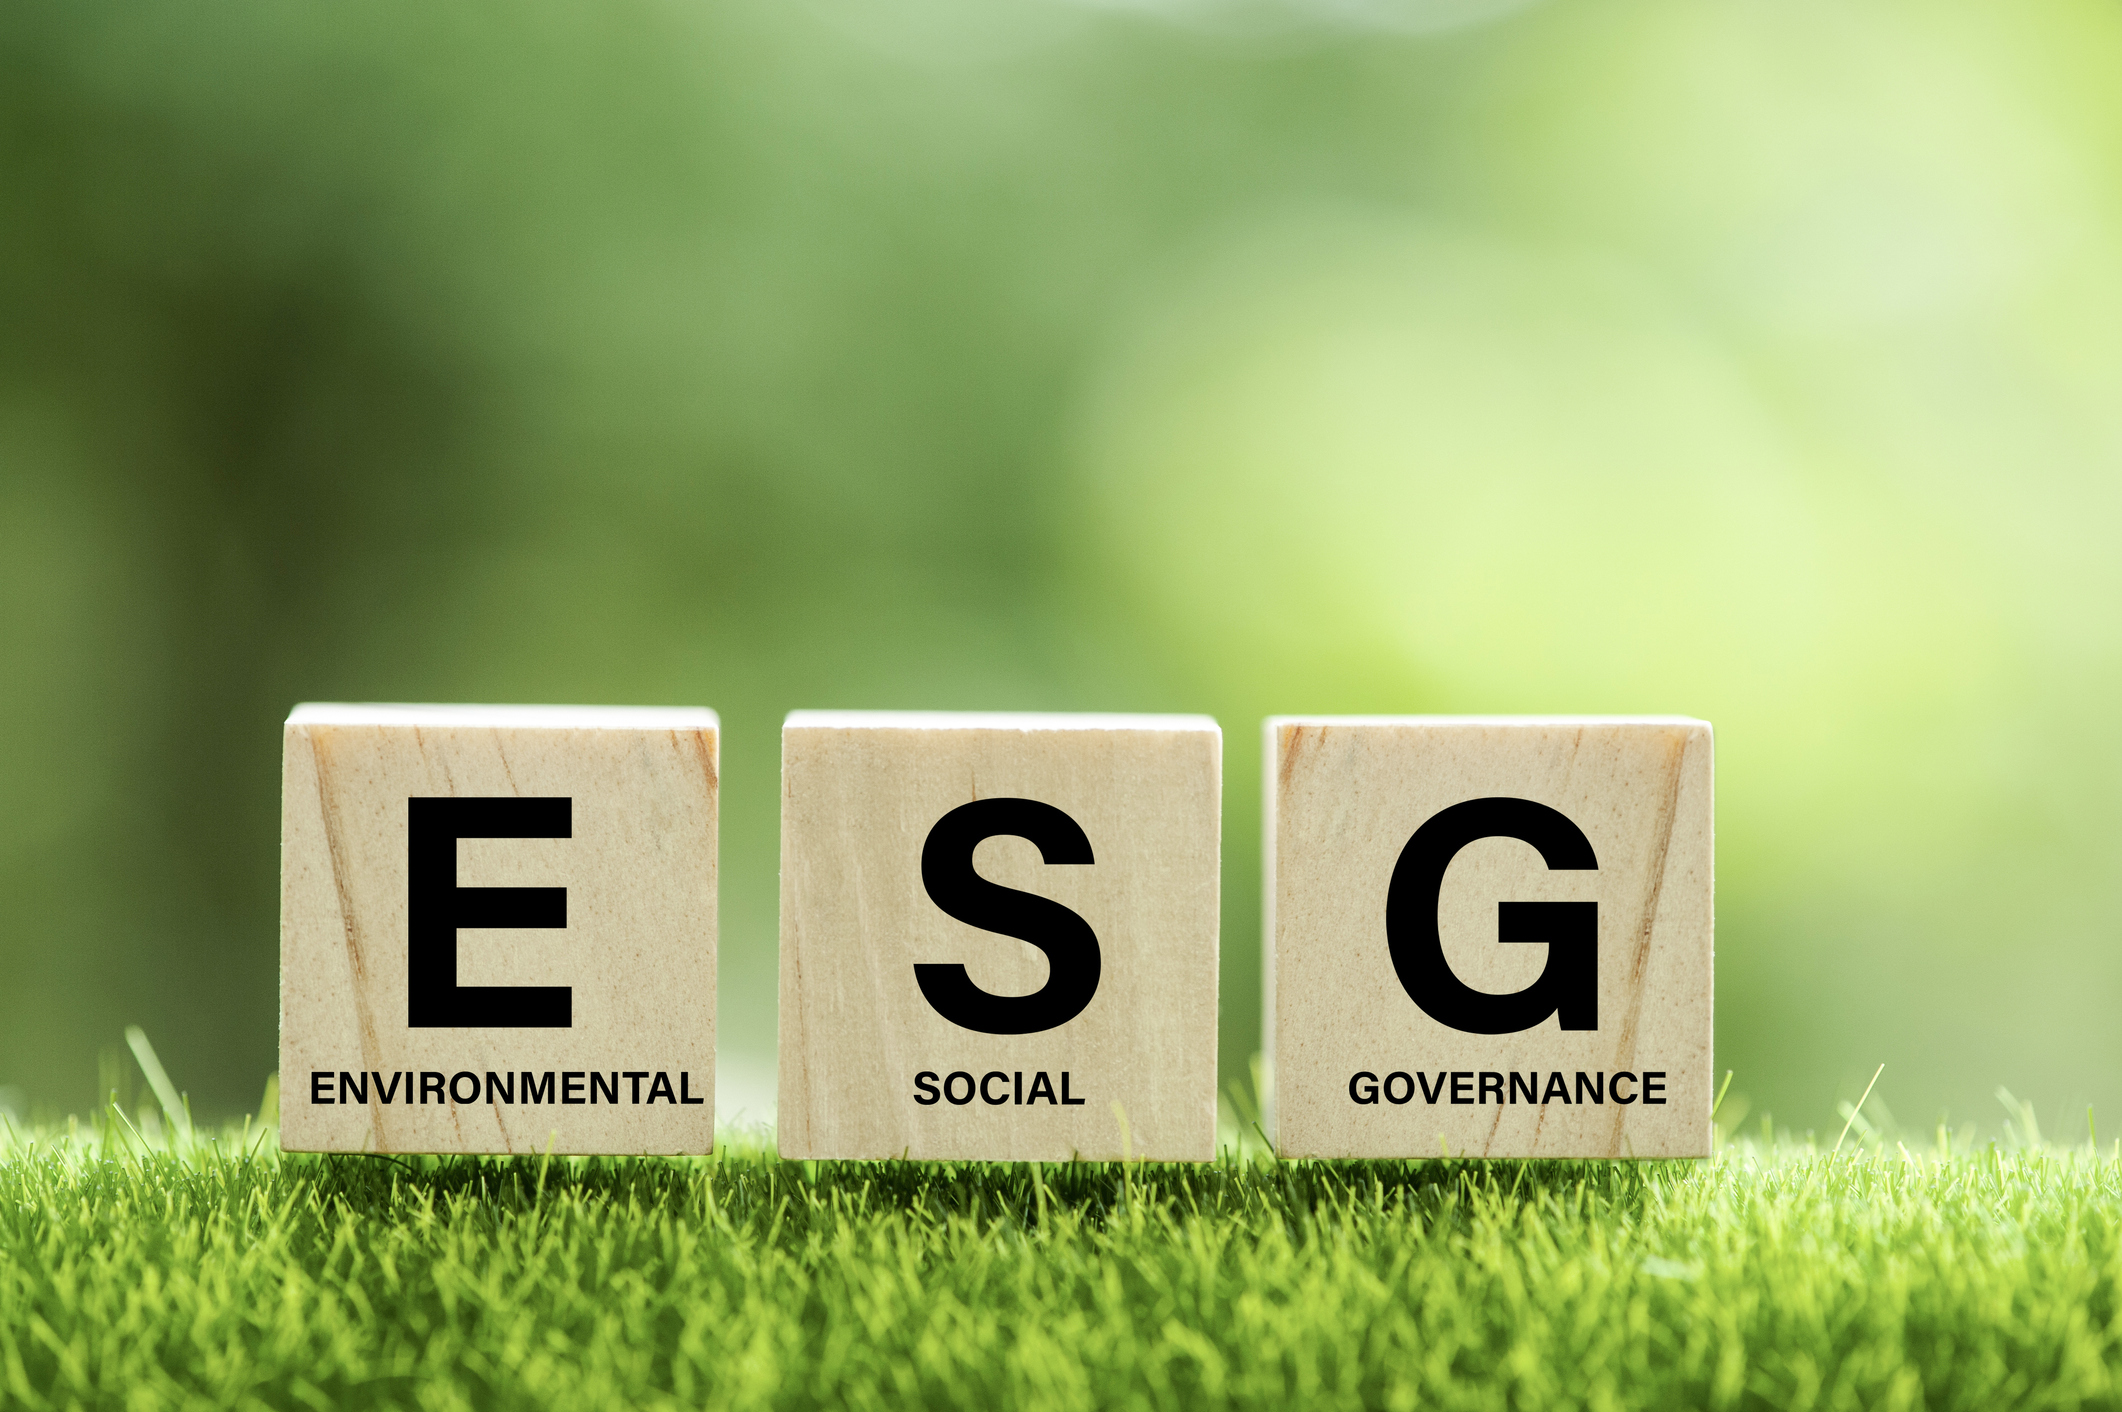 How to uphold & visually demonstrate your commitment to ESG